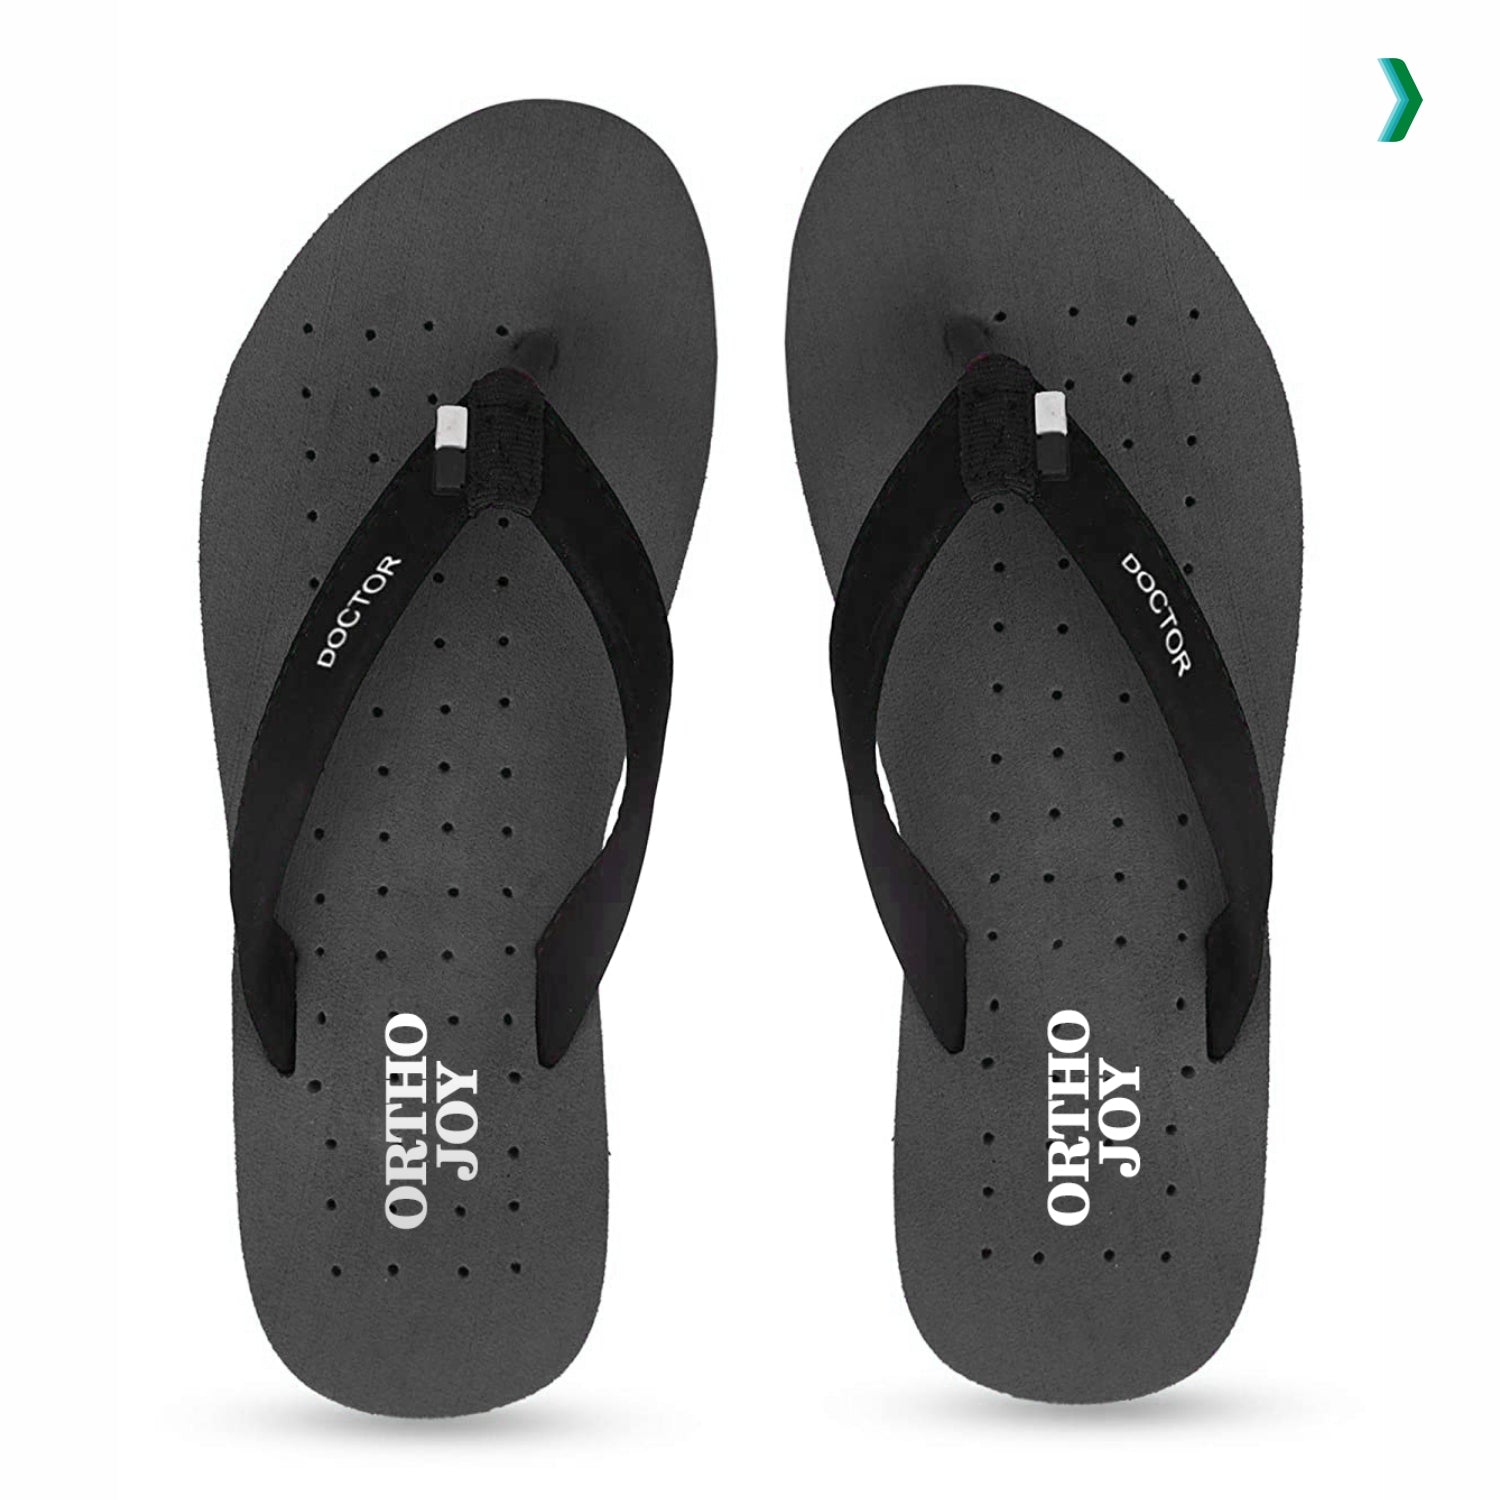 orthopedic slippers for women, ortho chappal for ladies